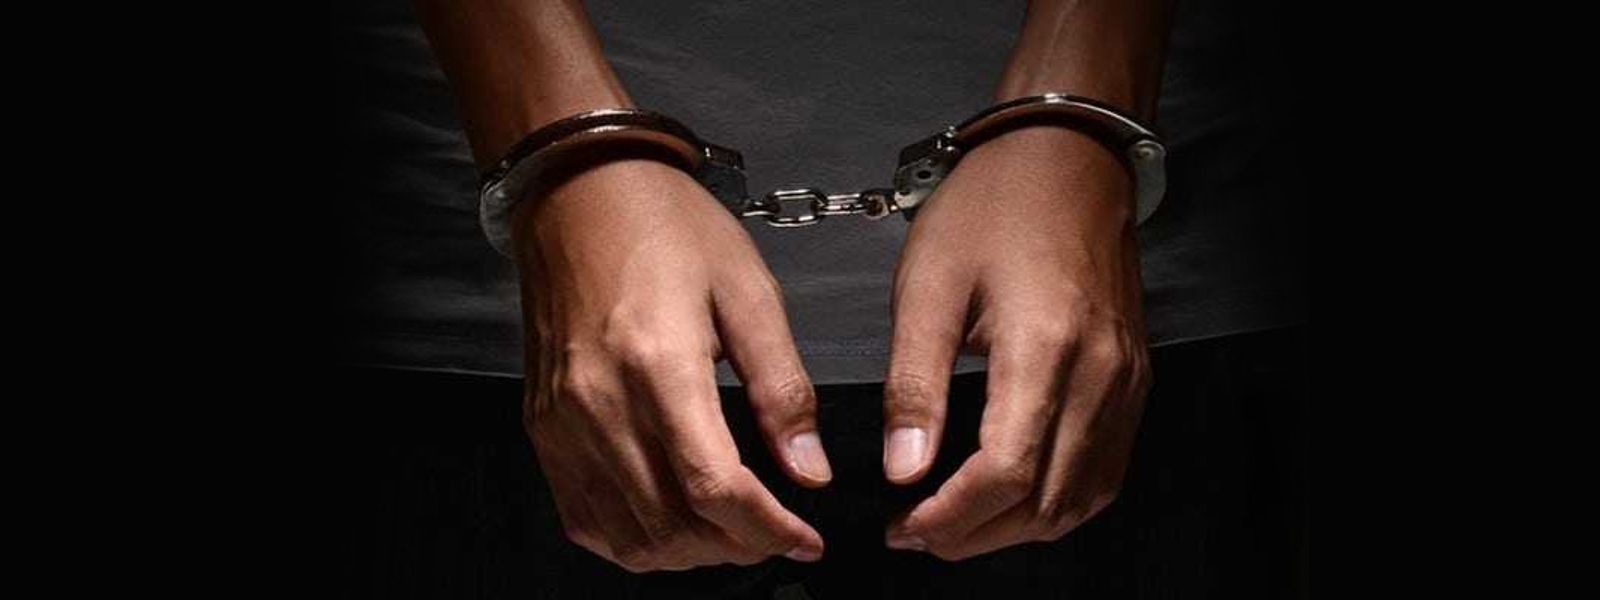 17 more students arrested for assaulting teacher